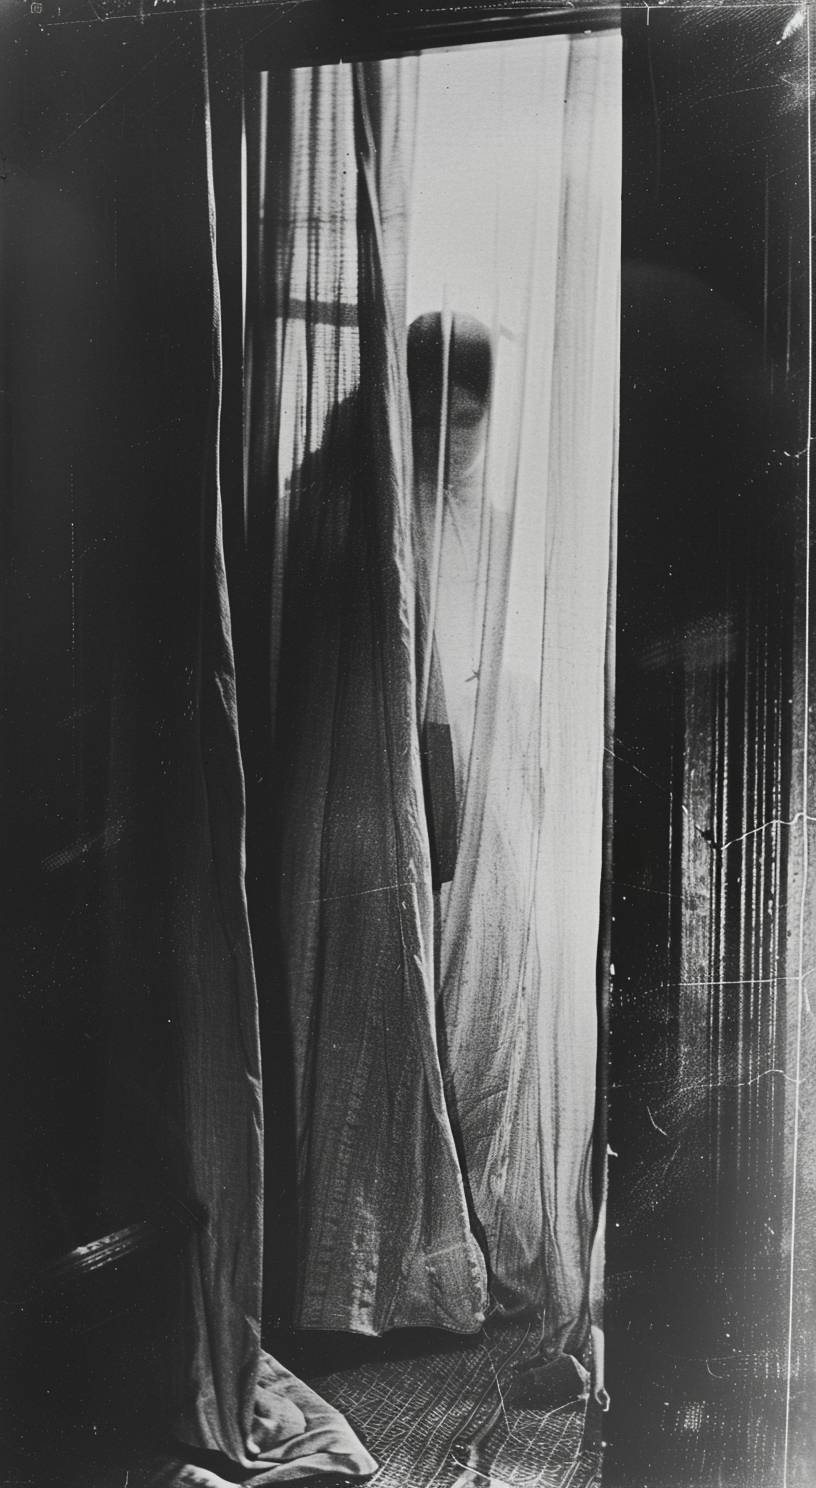 Accidental recording of ghost behind a curtain, 1920s photography, creepy horror scene, documentary archives